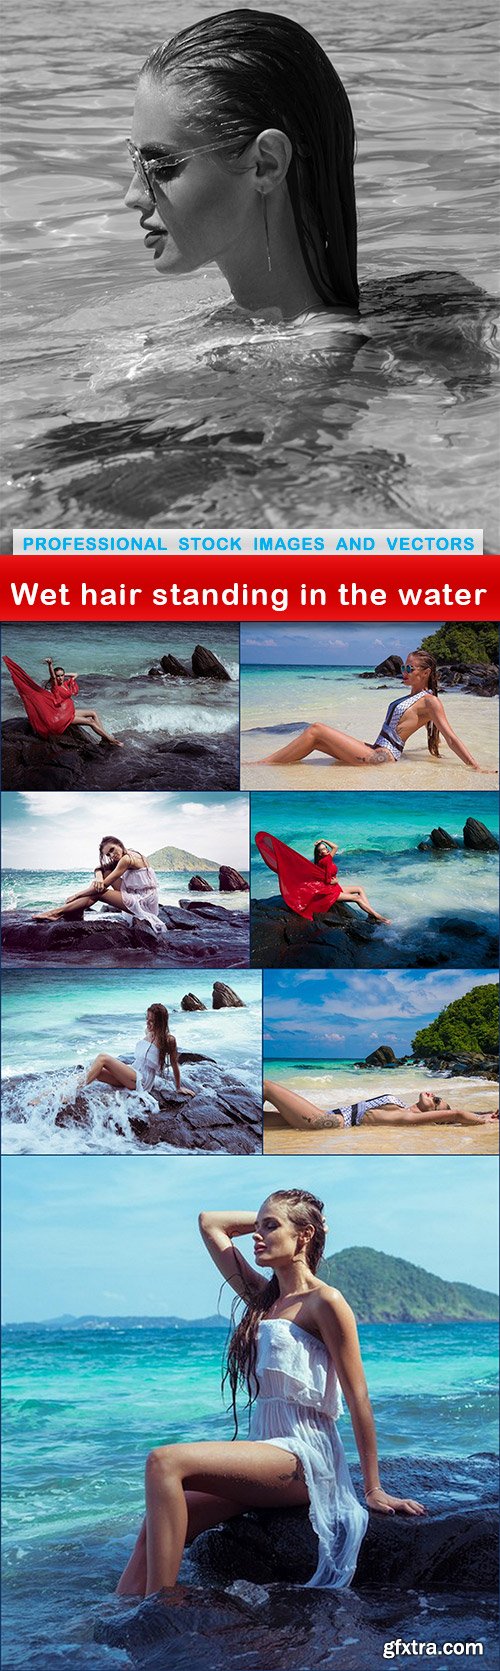 Wet hair standing in the water - 8 UHQ JPEG